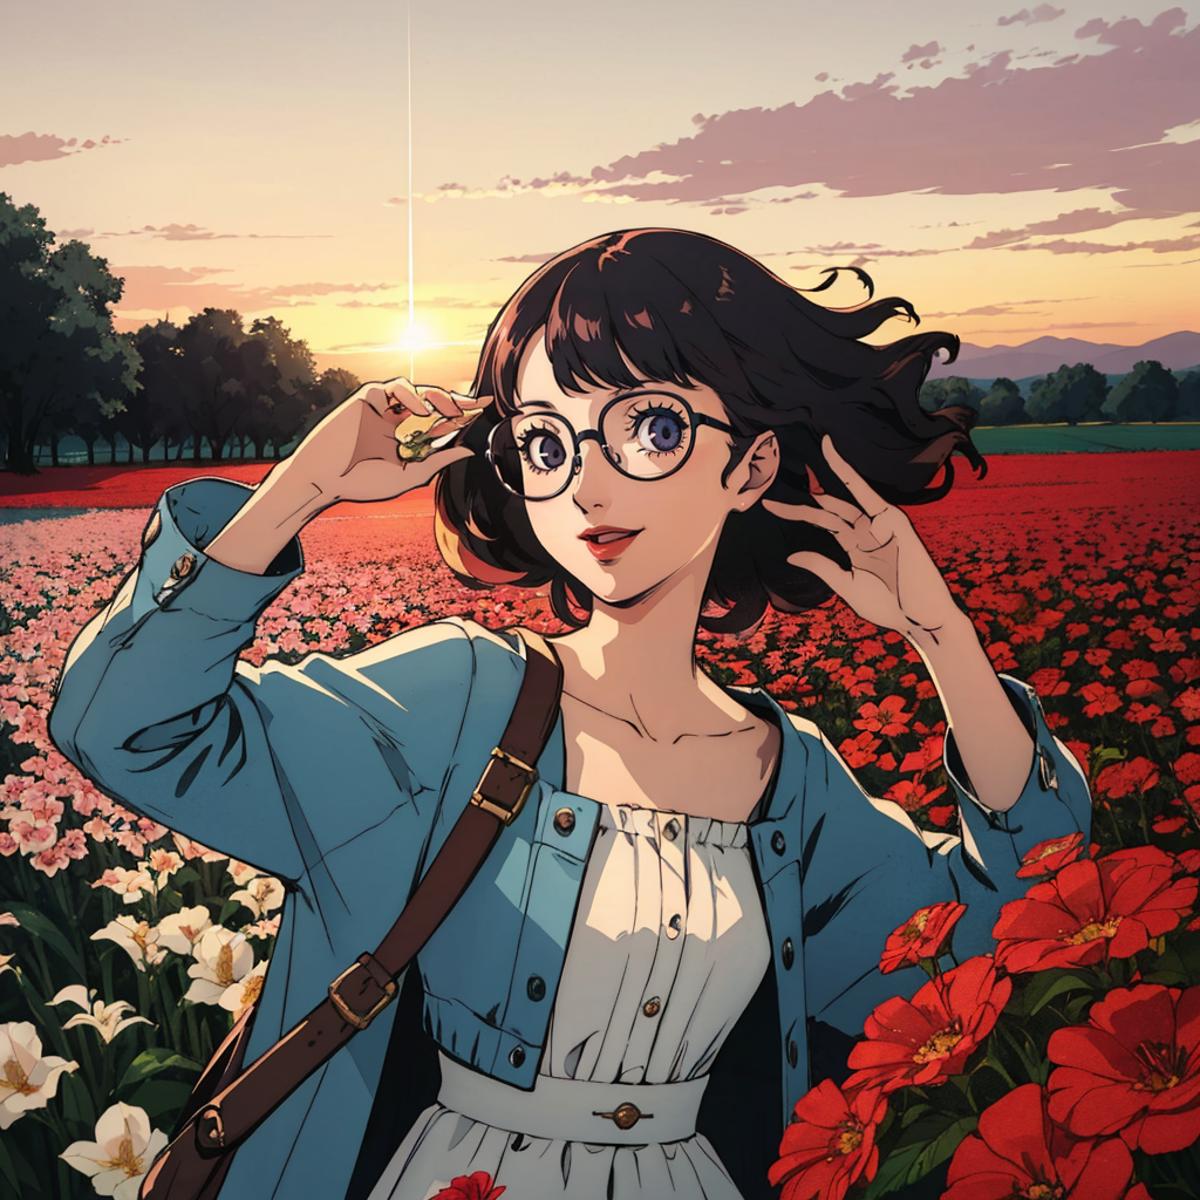 A woman wearing glasses and a blue jacket standing in a field of flowers.